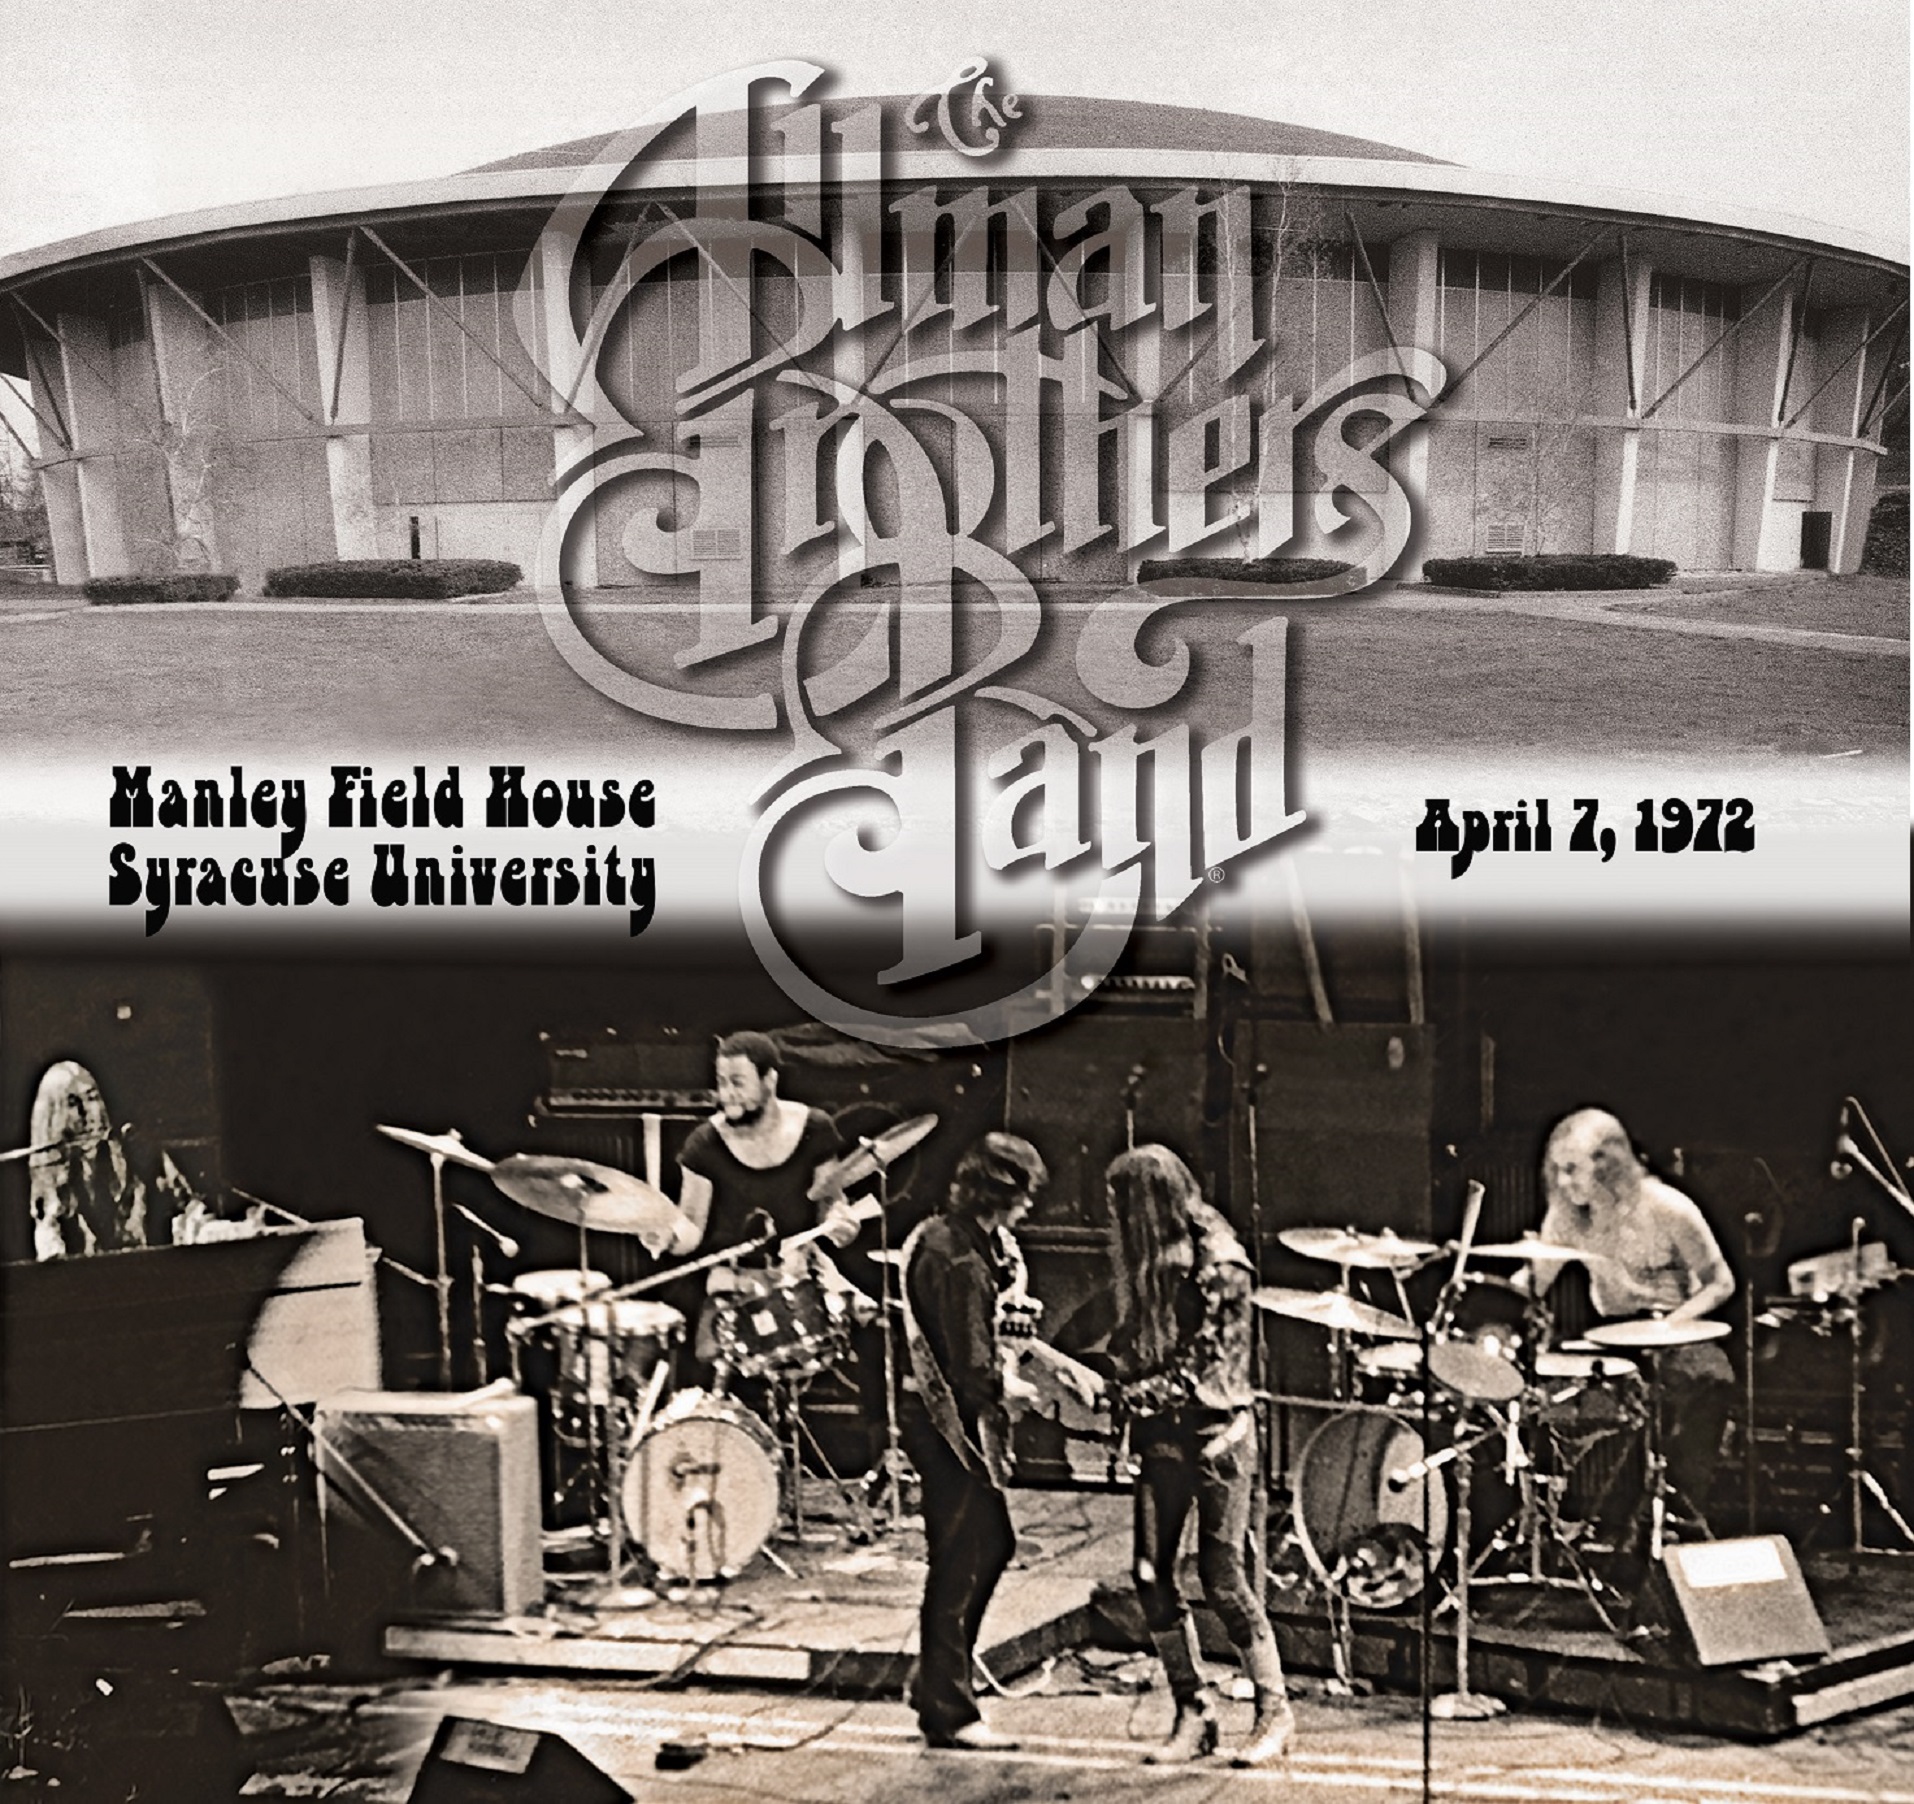 Allman Brothers Band Announces Release of 'Manley Field House, Syracuse University, April 7, 1972' Available on CD & Digital January 12